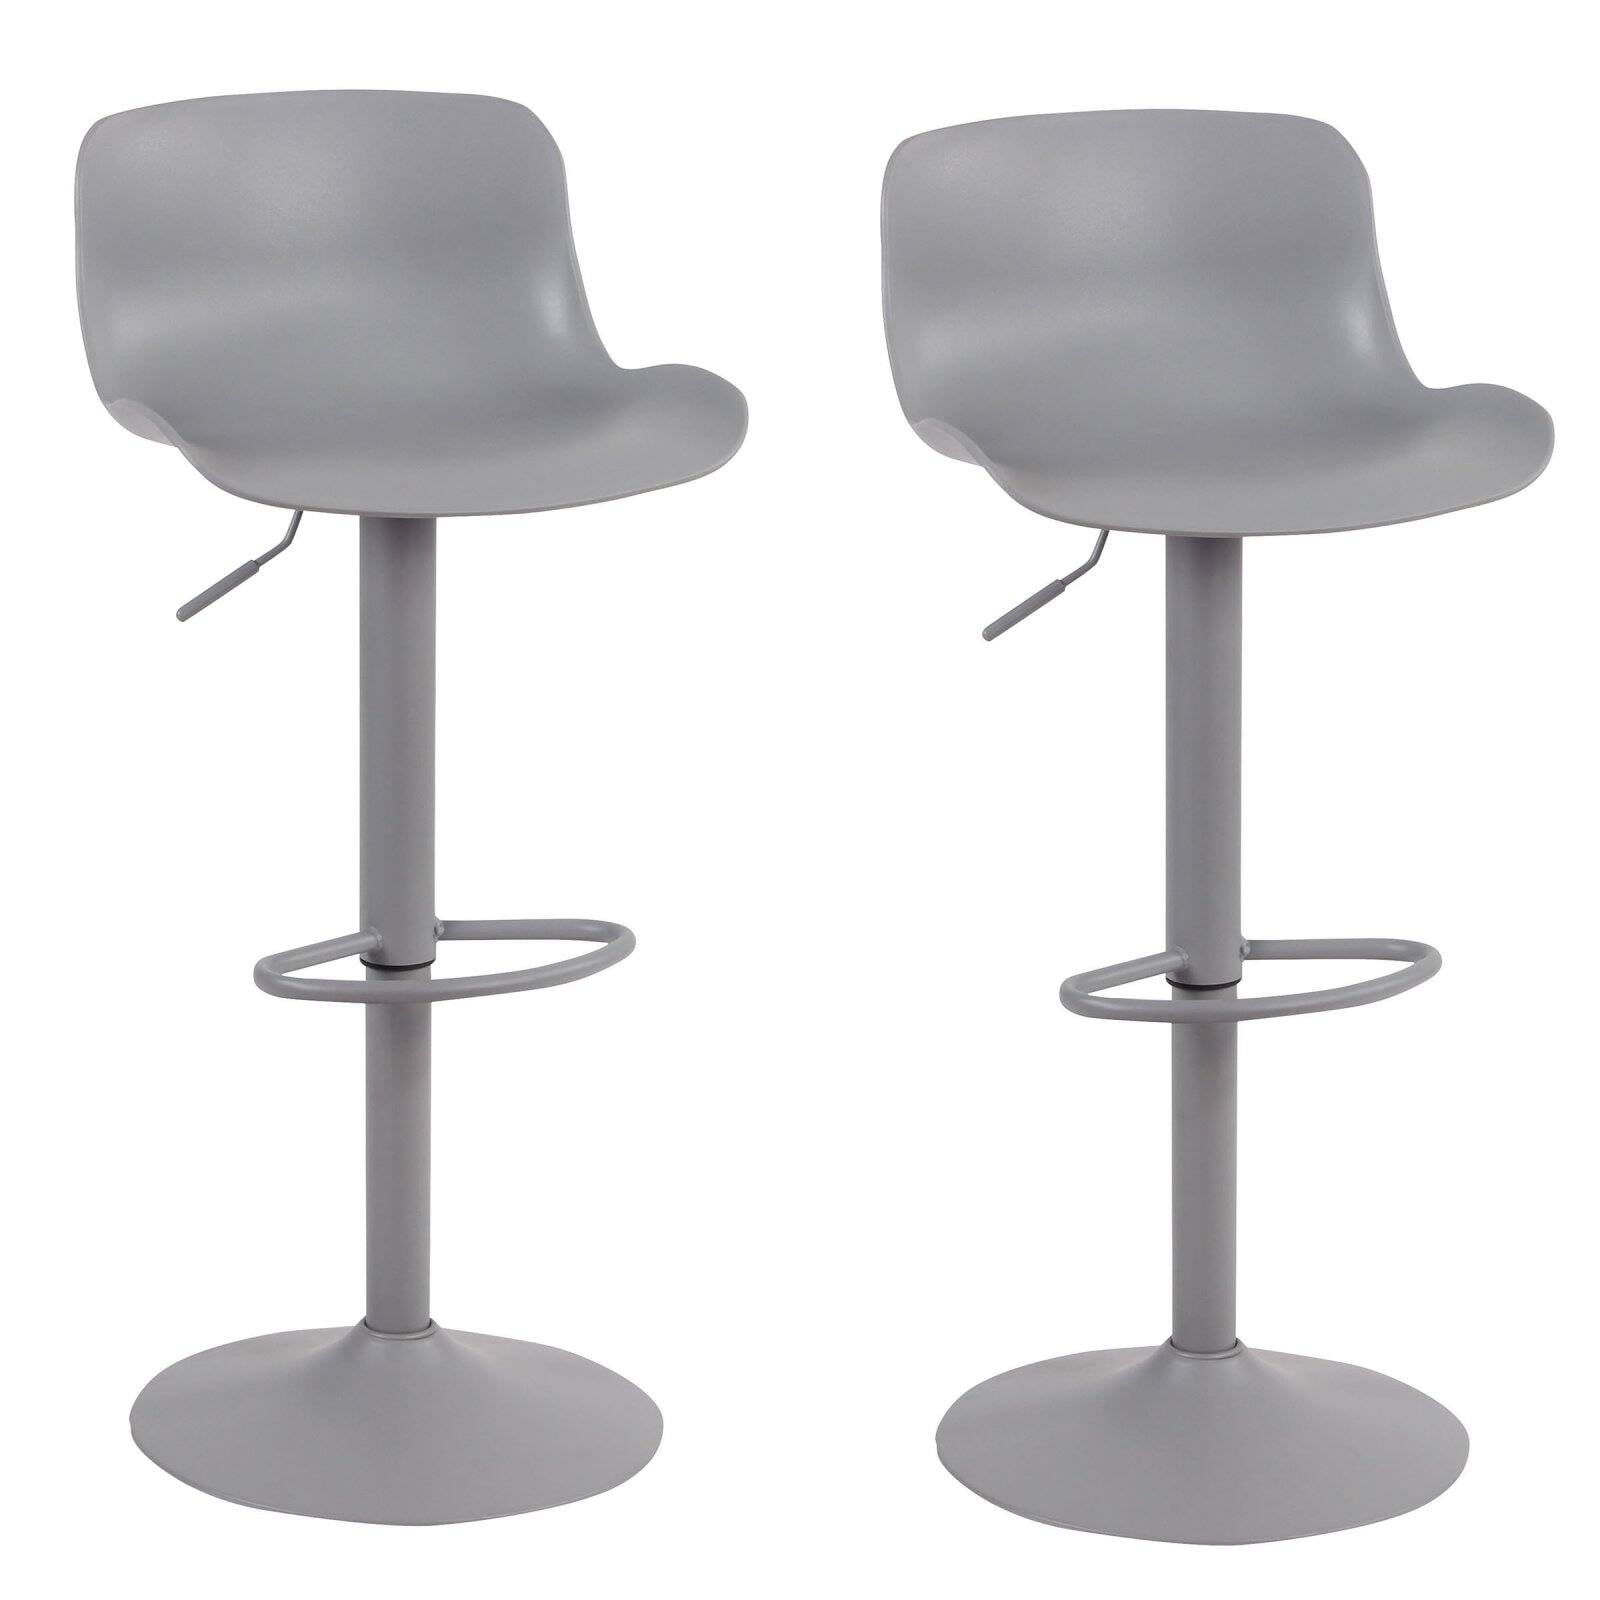 Bs199gset Adjustable Height Solid Color Monochromatic Bar Stool Set - Gray